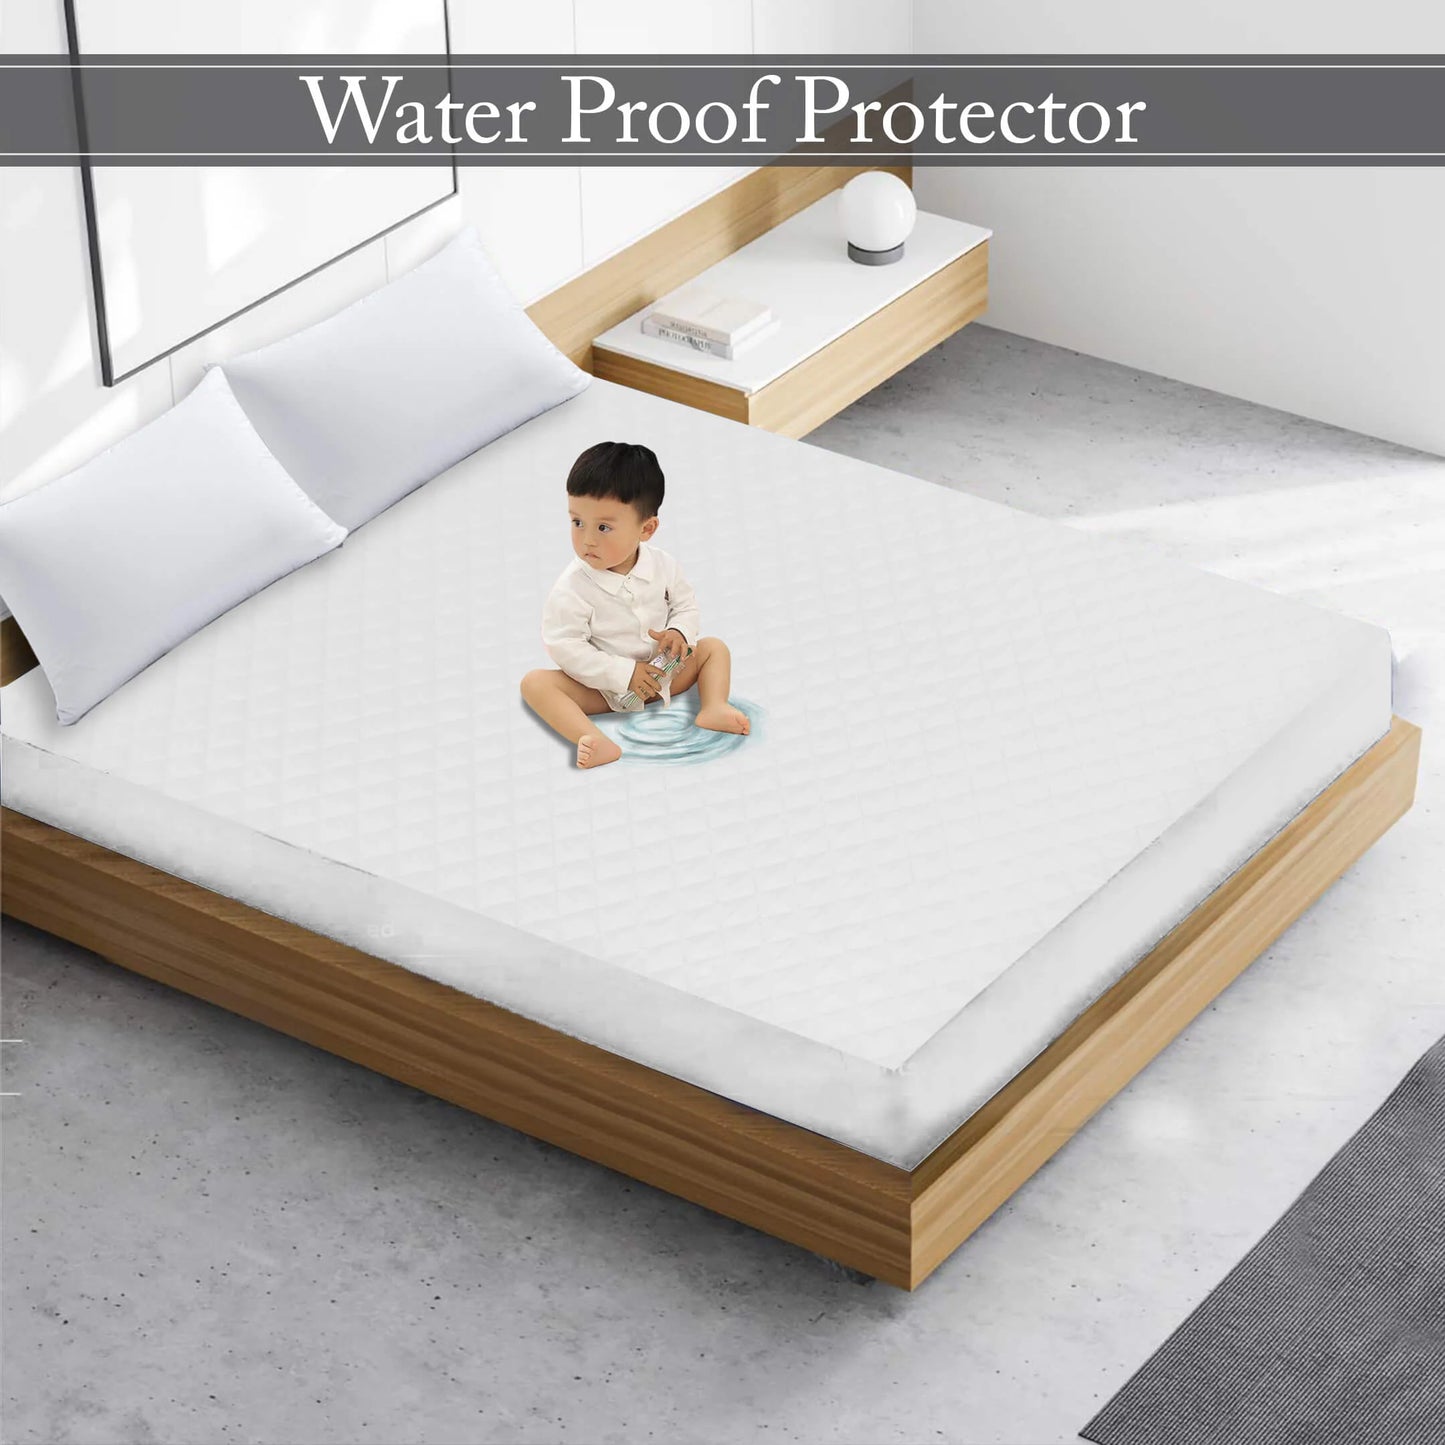 Waterproof Quilted Mattress Protectors With Elastic Fitted | 11.11 SALE  Buy 1 and Get 1 Free